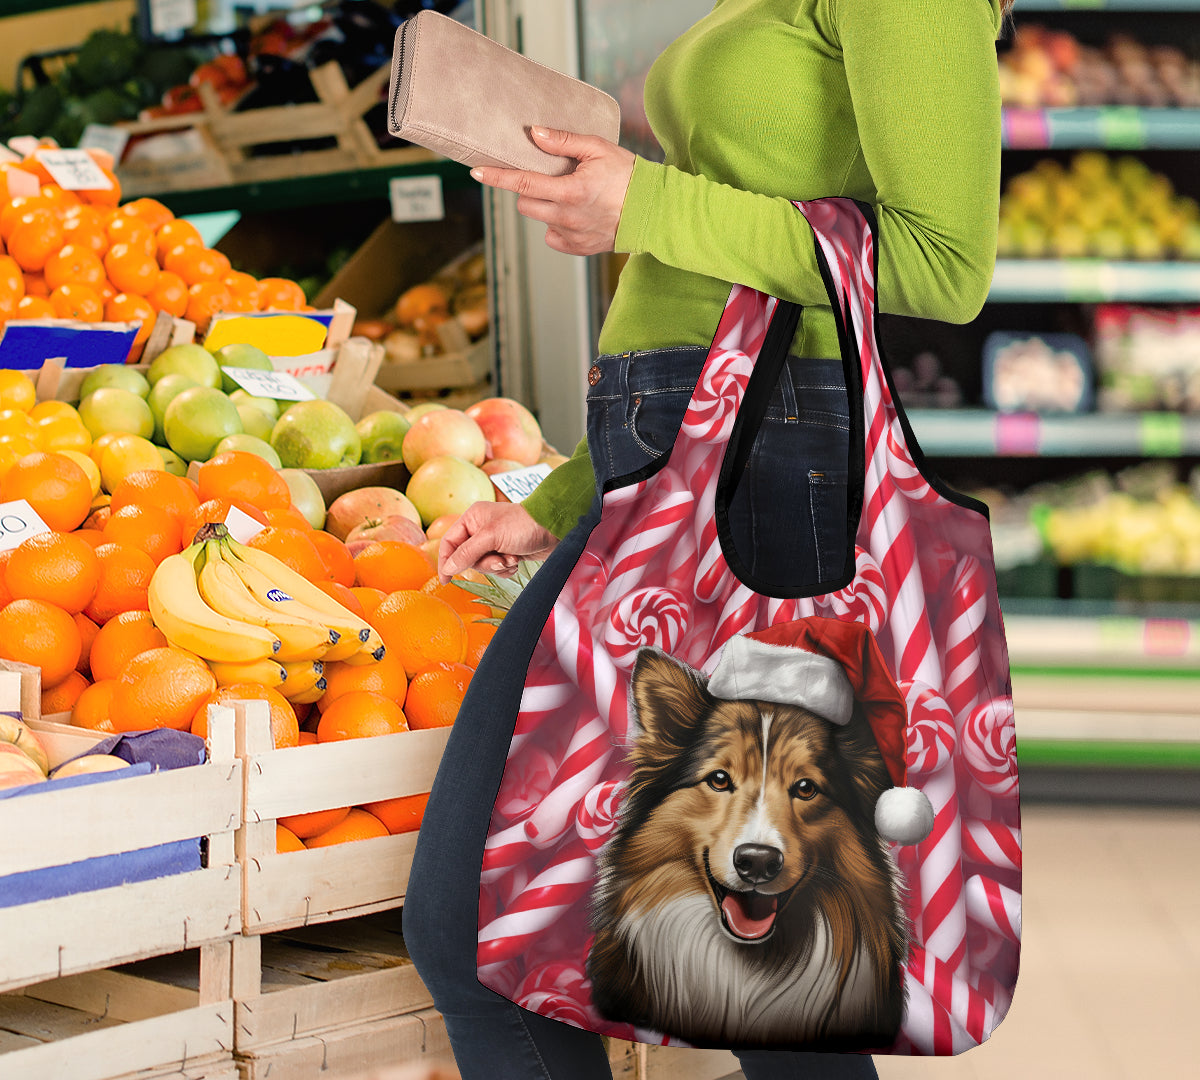 Shetland Sheepdog (Sheltie) Design 3 Pack Grocery Bags - 2023 Christmas / Holiday Collection